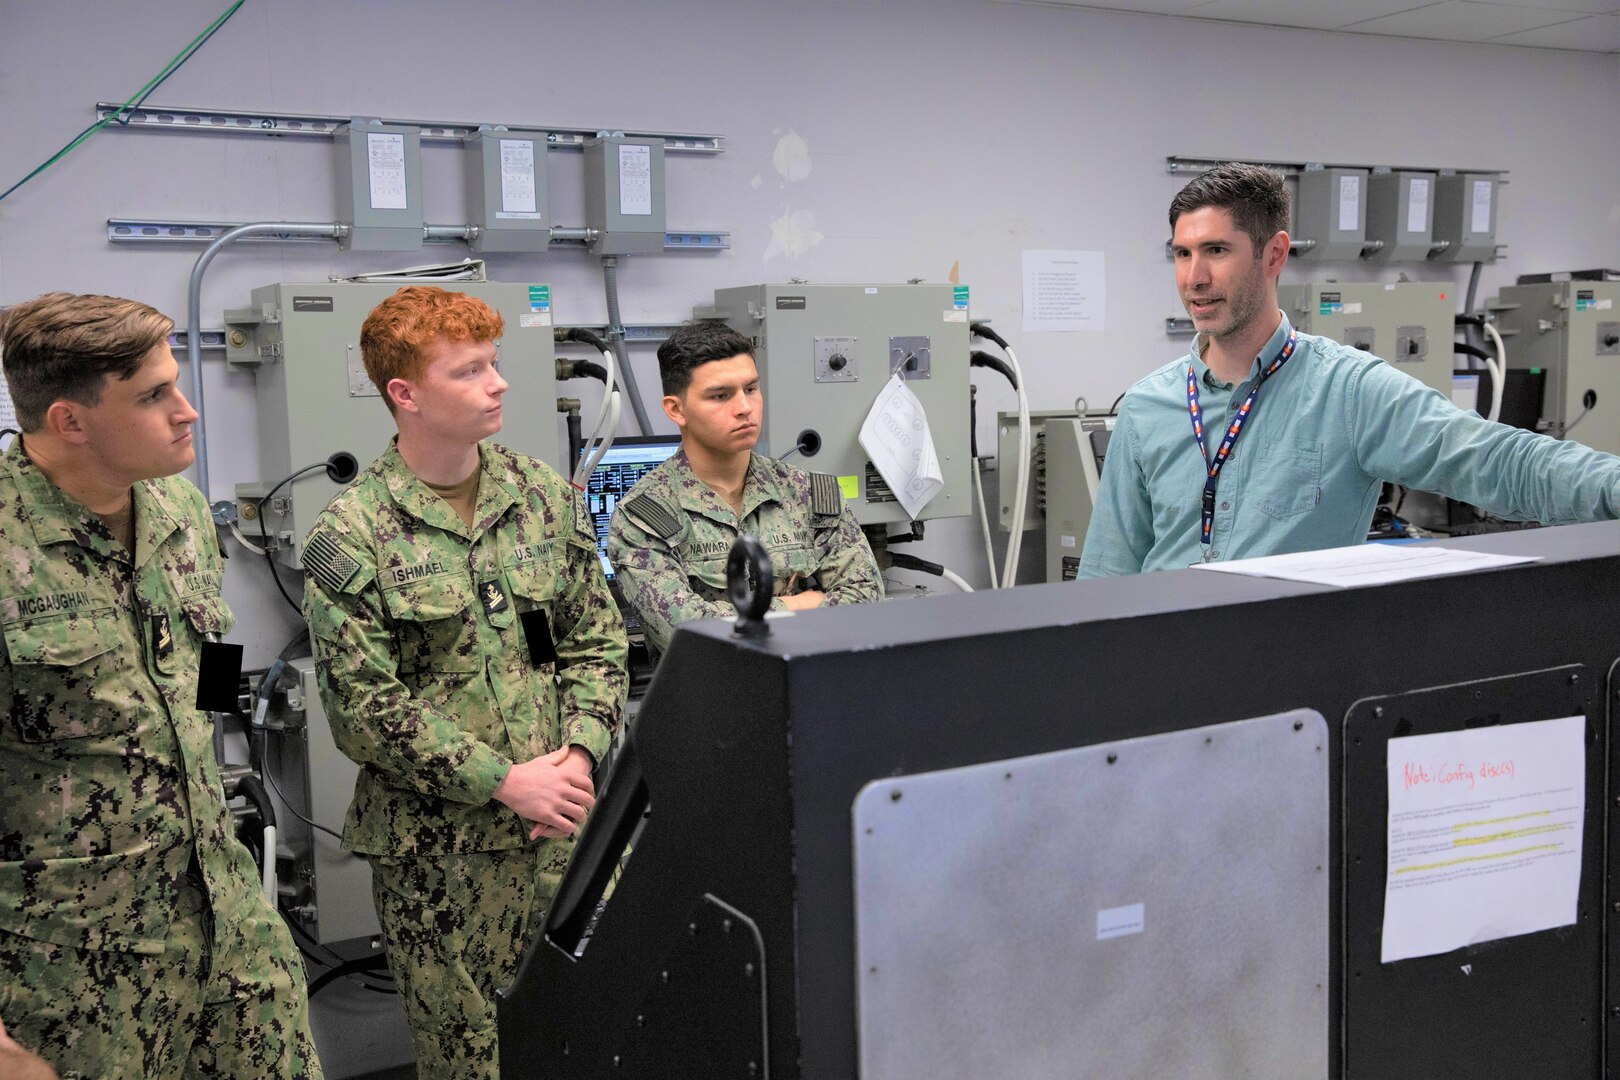 Daniel Weissgerber (far right), an electrical engineer at Naval Surface Warfare Center, Philadelphia Division (NSWCPD) discusses the Integrated Bridge Navigation System with U.S. Naval Academy students assigned to the Naval Architecture and Ocean Engineering (EN) 350 Marine Engineering Systems Class; (from left) Midshipman 2nd class Brandon McGuaghan, Midshipman 2nd class Ishmael Ian, and Midshipman 2nd class Liam Nawara. The Naval Academy students visited NSWCPD on Oct. 26, 2022 to gain on-site experience with different naval technologies.